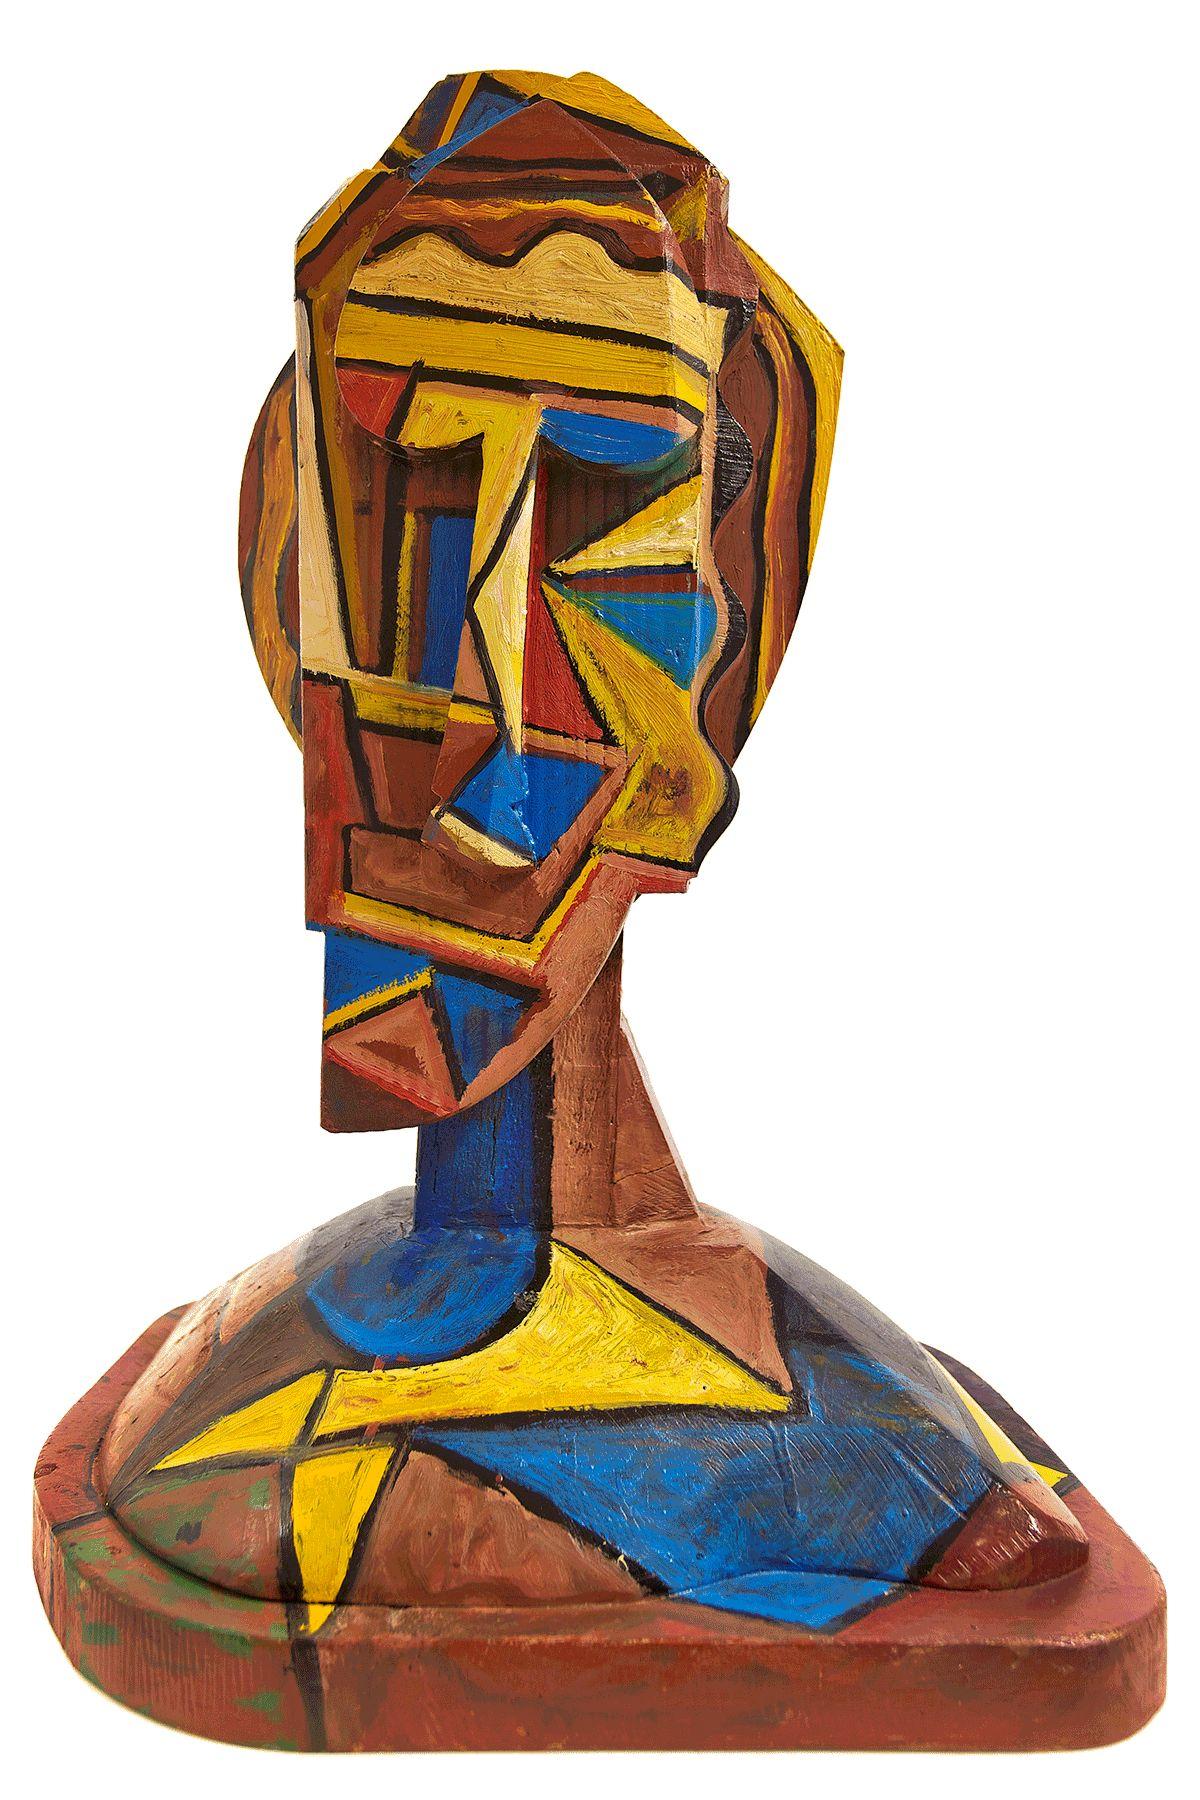 Abstract Geometric Cubist Painted Wood Sculpture Head Italian Neo Figurative Art - Brown Abstract Sculpture by Italo Scanga